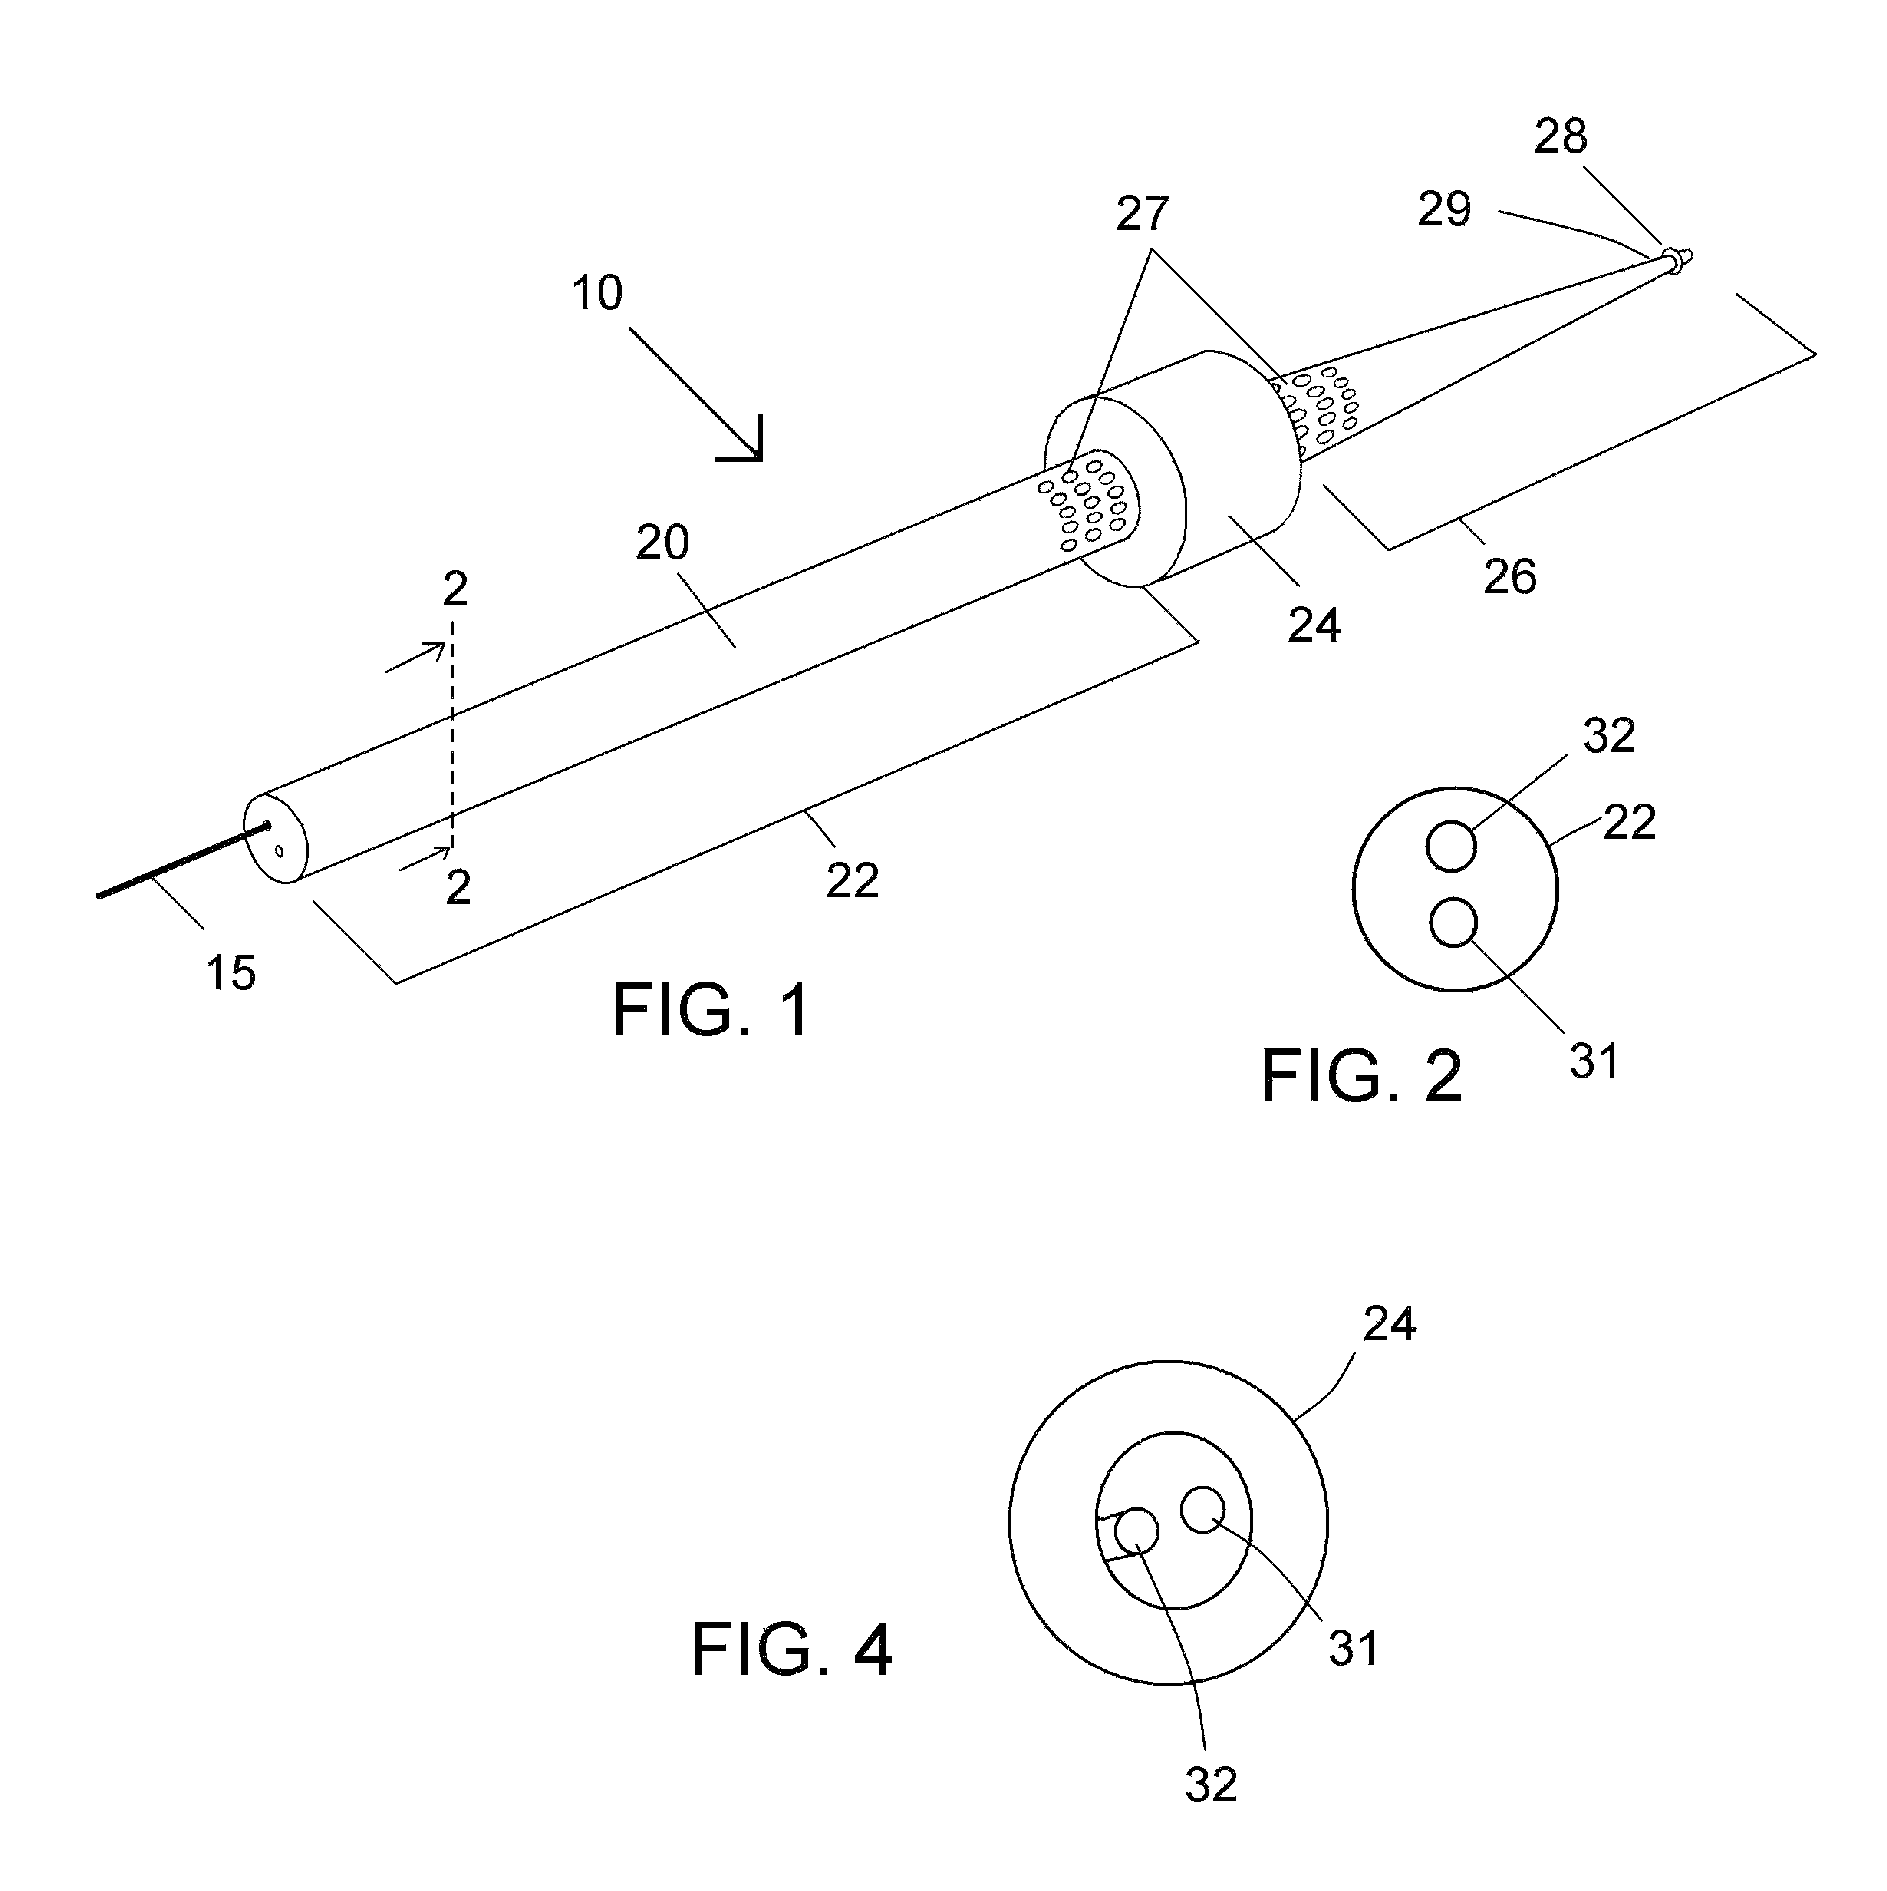 Method for performing angioplasty and angiography with a single catheter